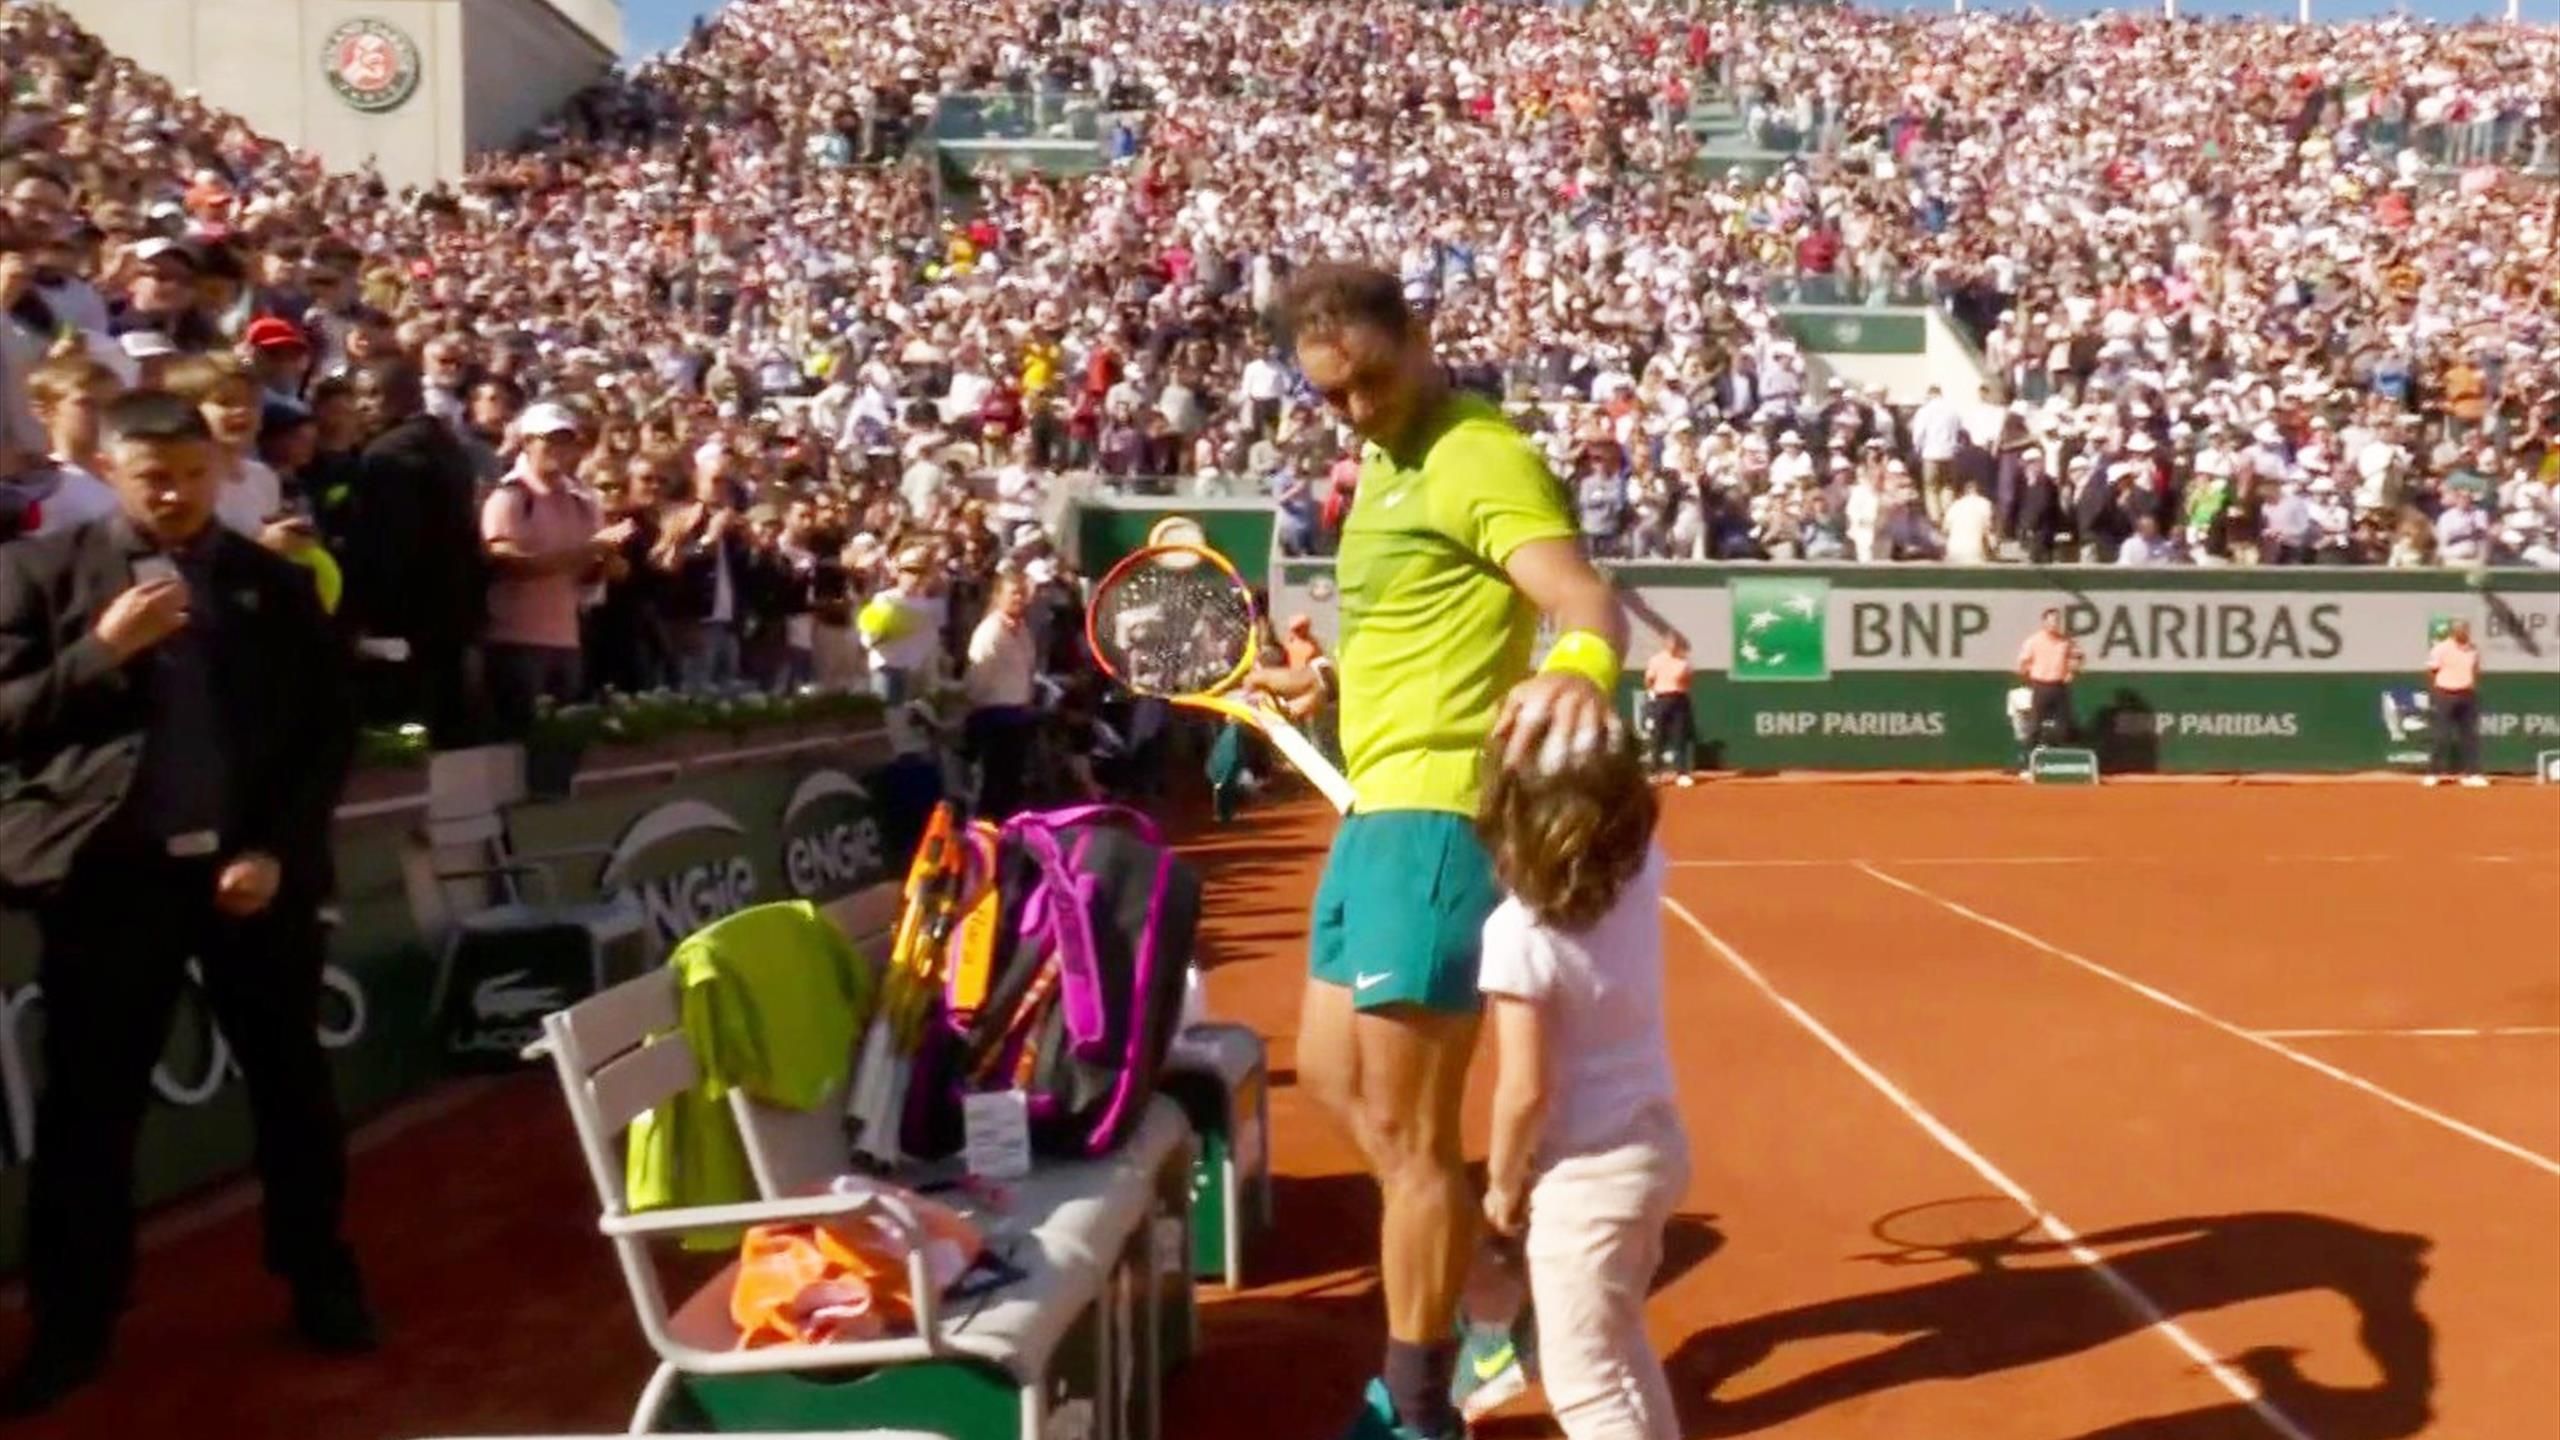 Rafa surprised! - Watch as boy runs on court to greet Rafael Nadal after match at French Open - Tennis video